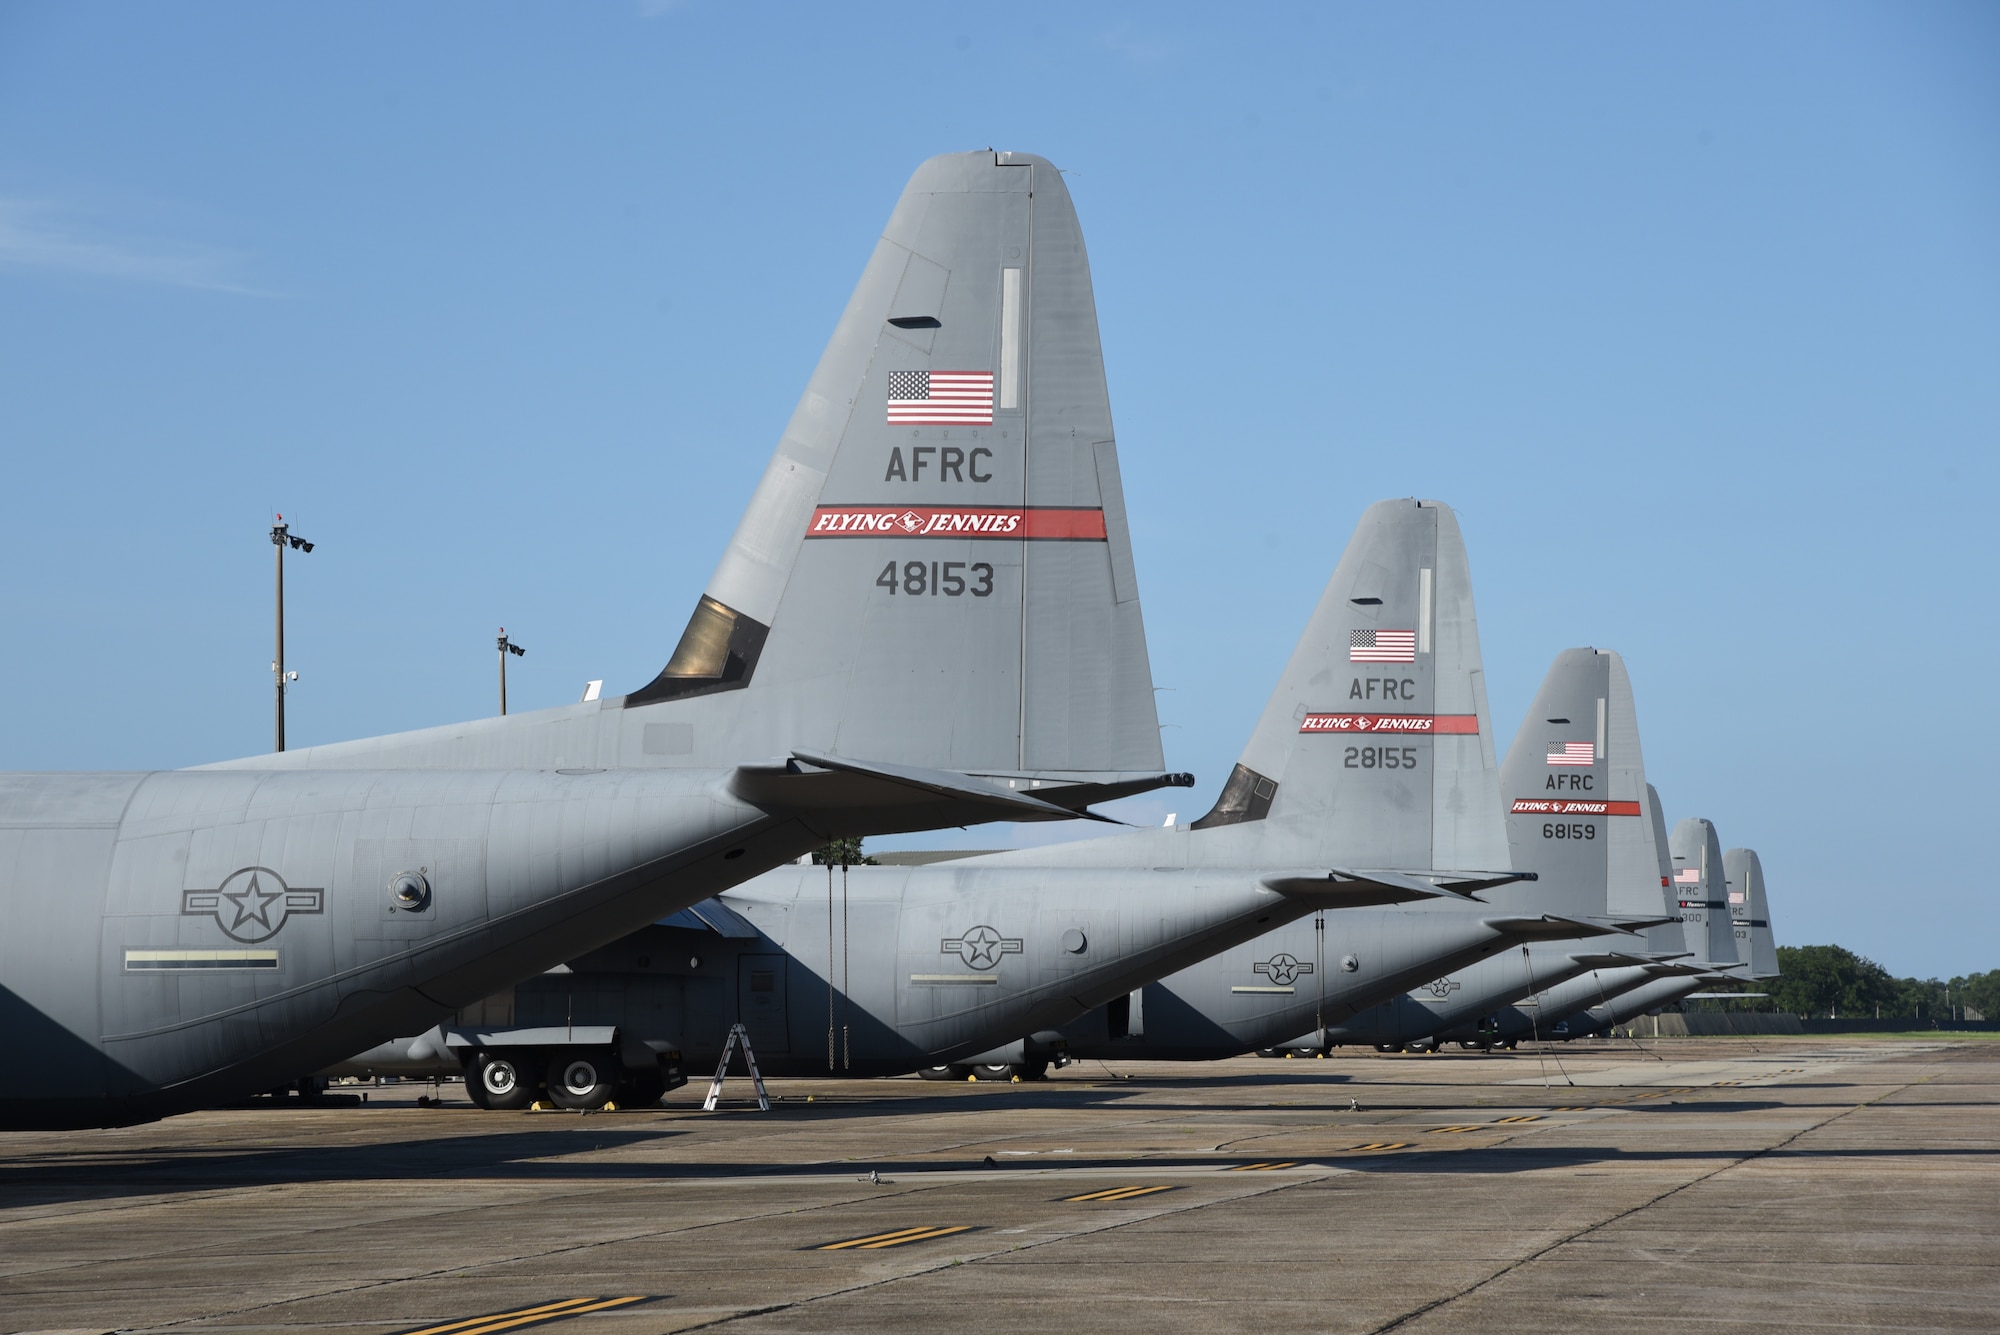 A line of C-130J and W-C130J Super Hercules aircraft from the 815th Airlift and 53rd Weather Reconnaissance Squadrons on the flight line, July 17, 2020, Keesler Air Force Base, Mississippi. The mission of the 815th AS is to recruit, organize and train to deploy, redeploy and employ air and ground forces to any area of the world and provide them with logistical support. The 53rd WRS is tasked to collect weather data from within tropical storms and is the only Department of Defense unit that flies that mission. (U.S. Air Force photo by Tech. Sgt. Michael Farrar)